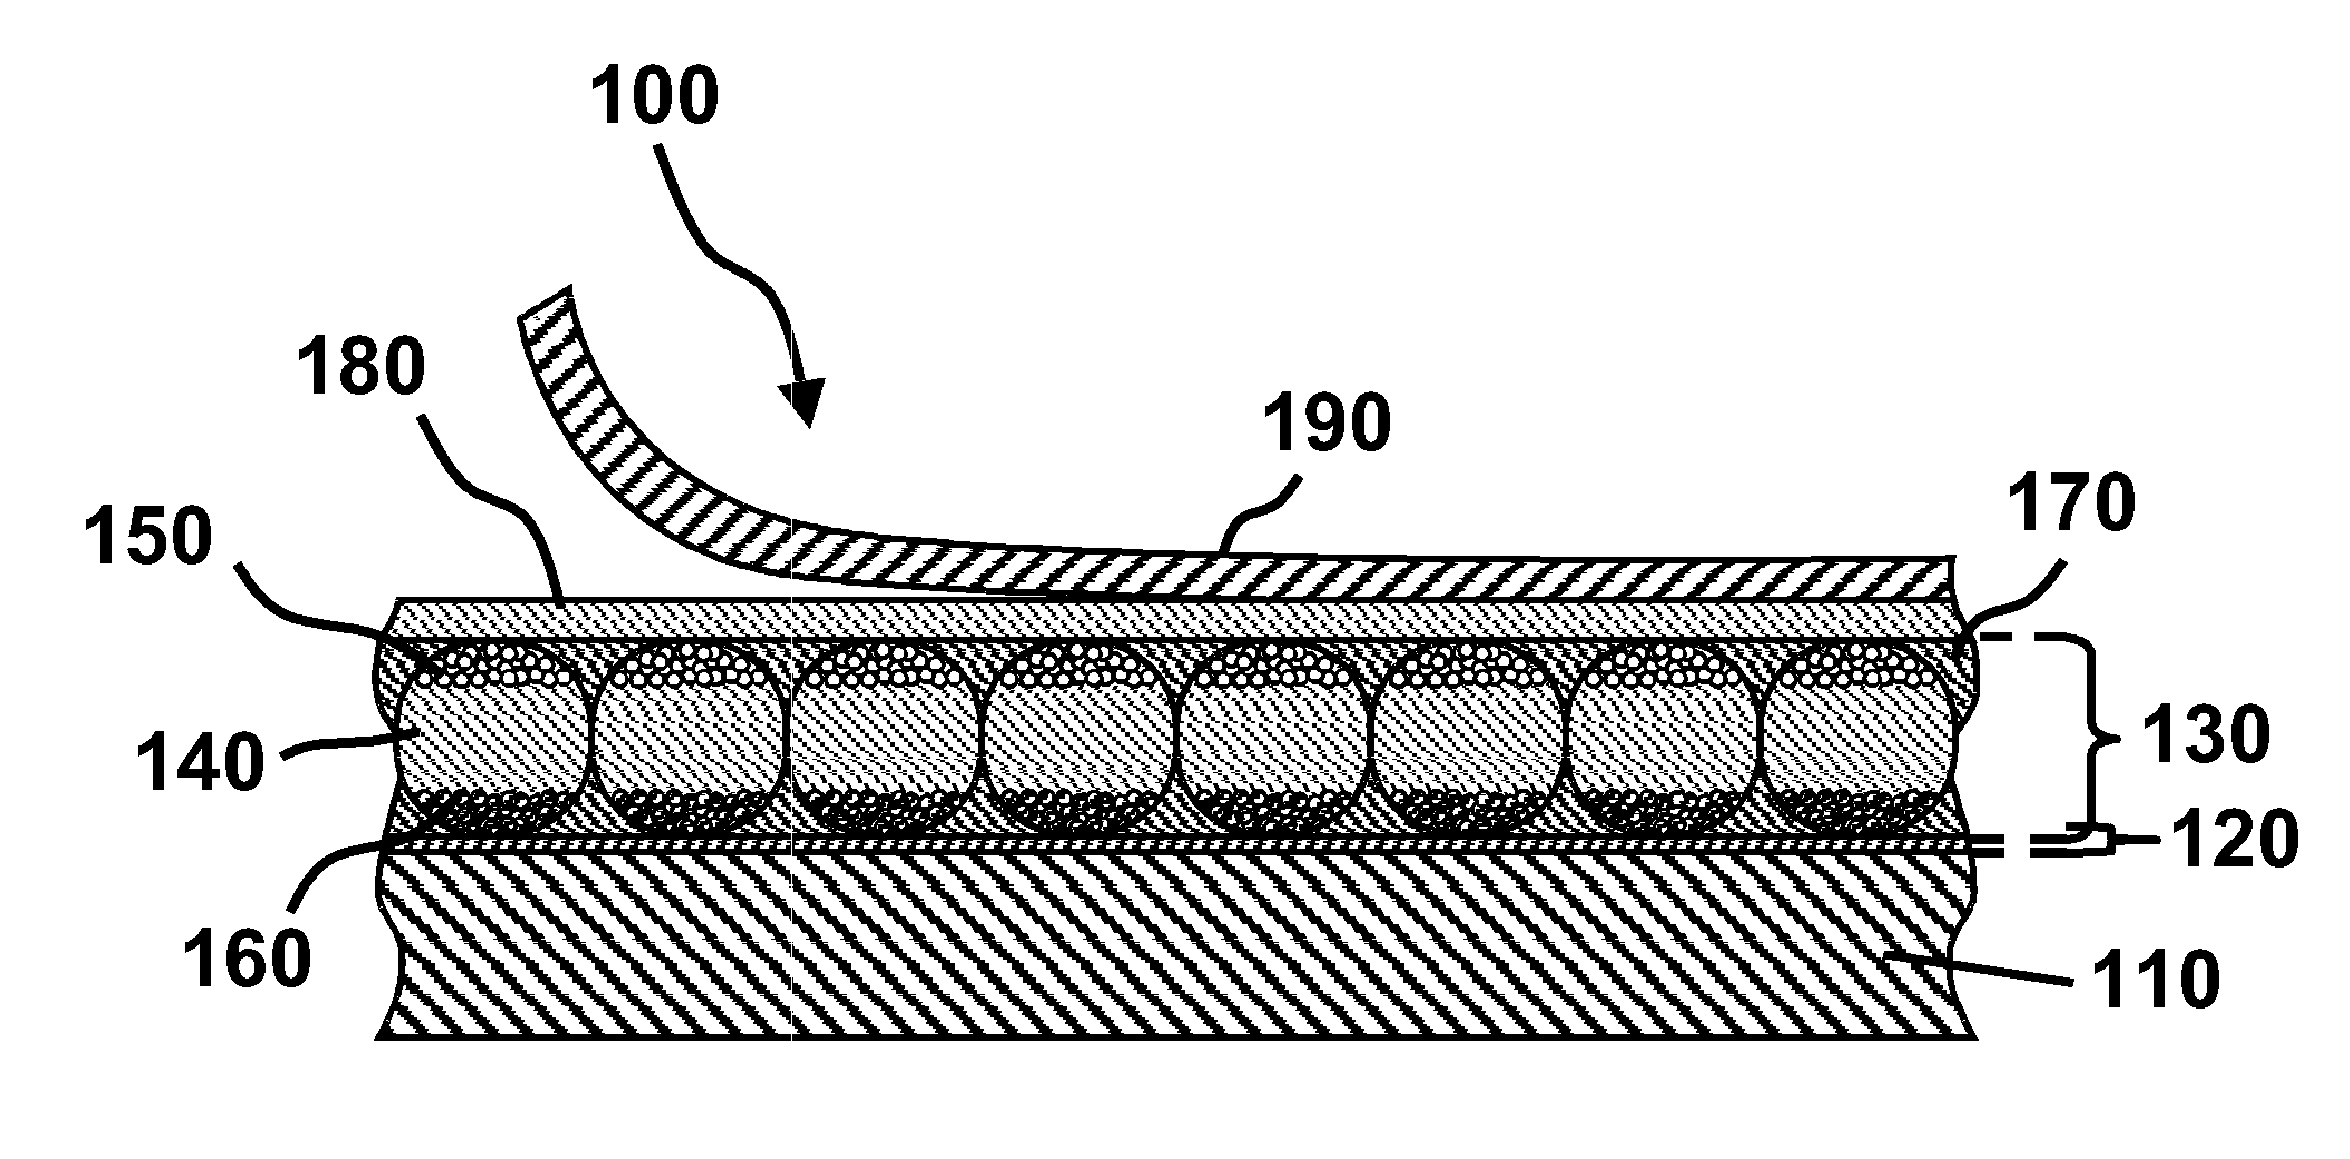 Electro-optic display and materials for use therein